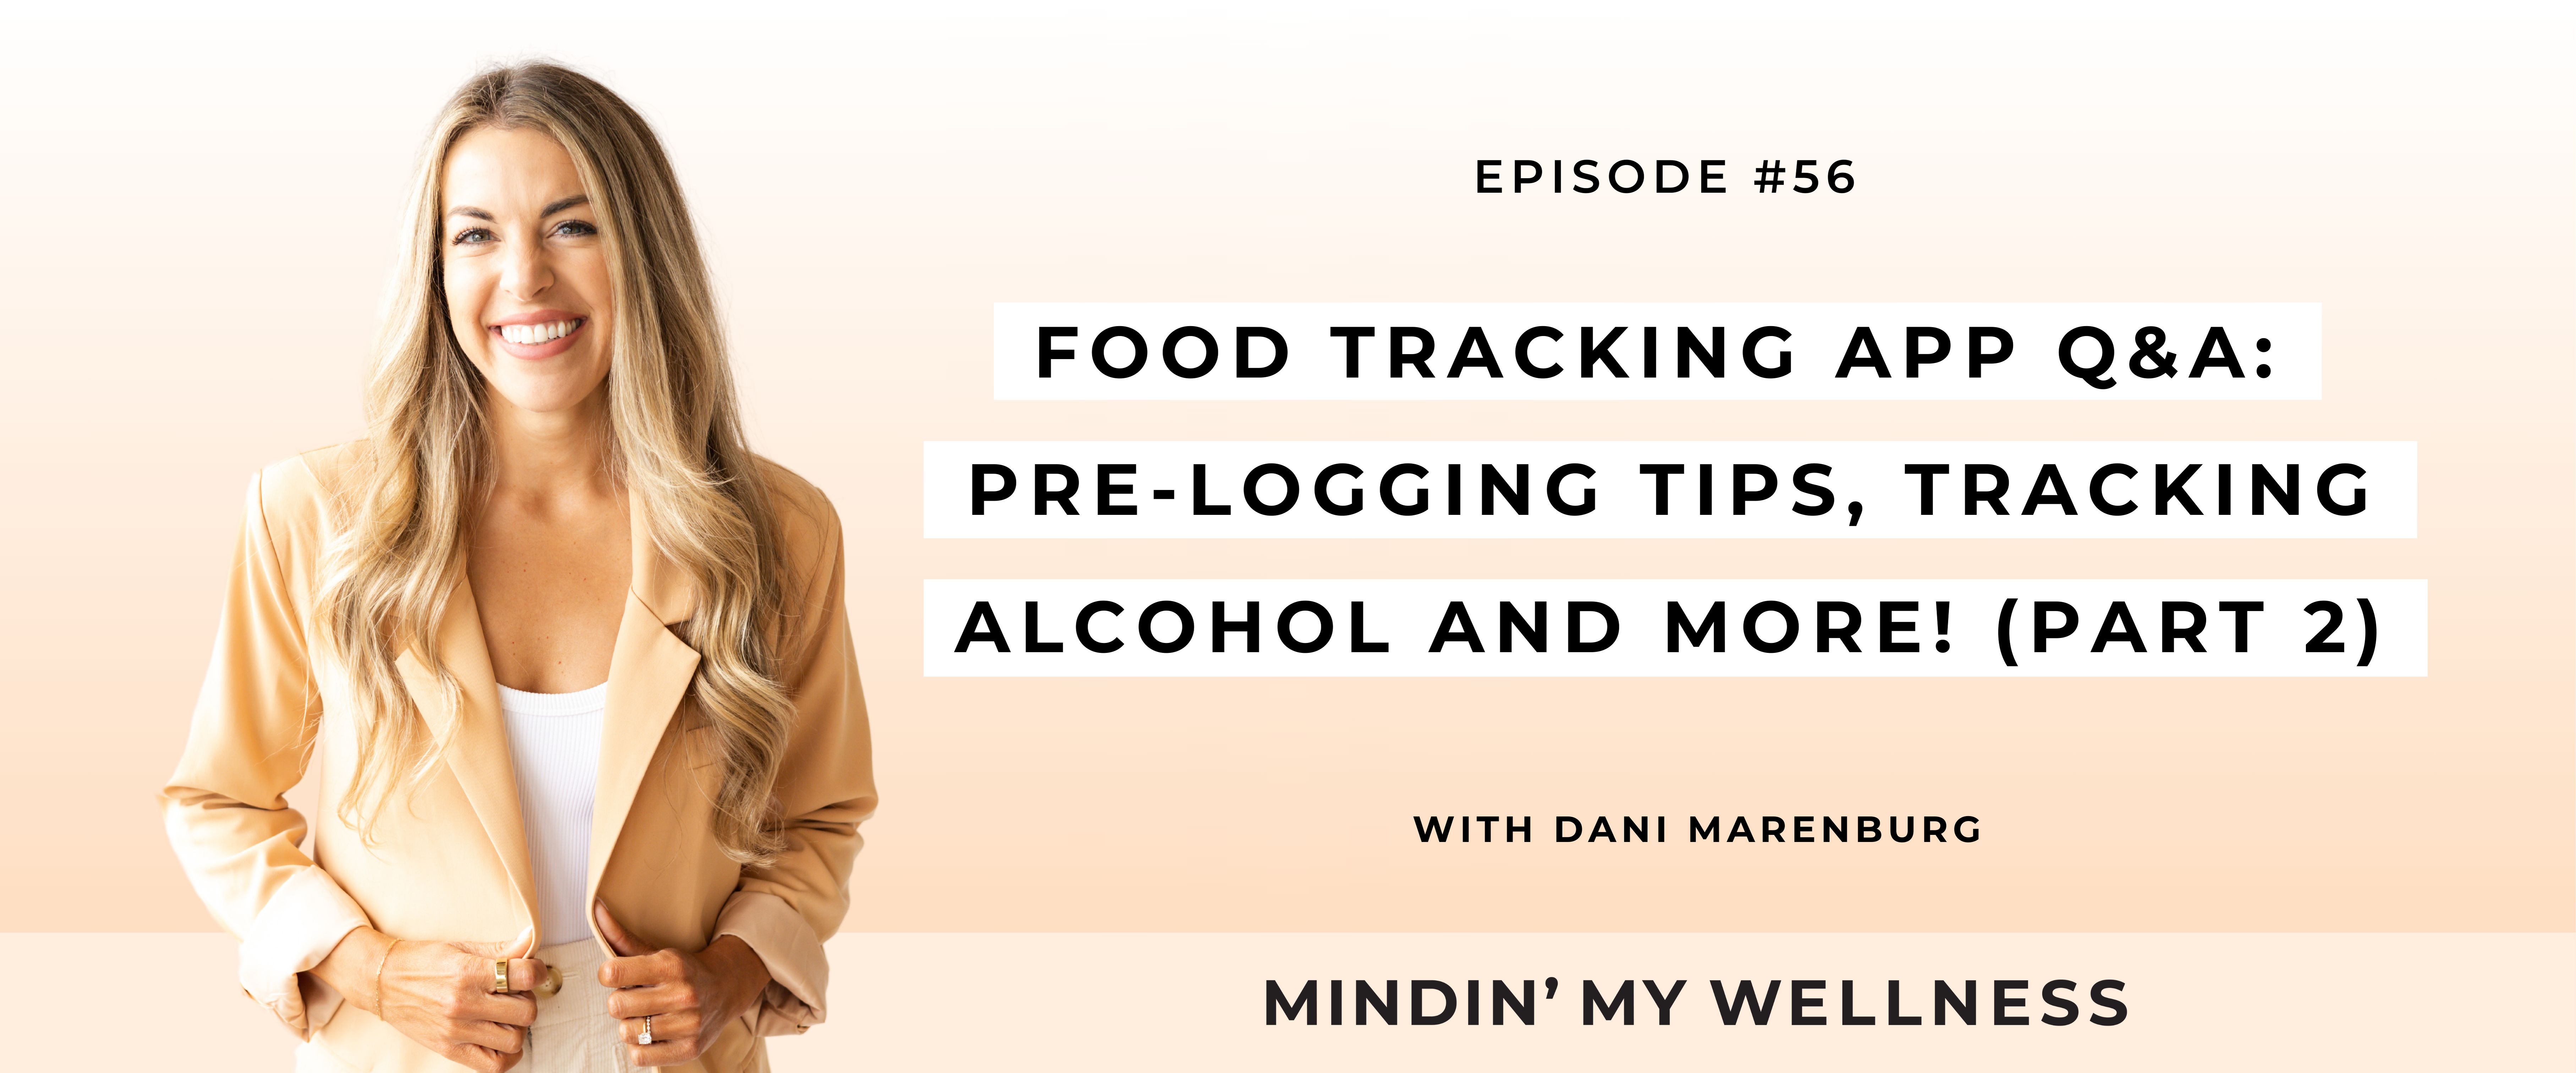 Food Tracking App Q&A: Pre-logging Tips, Tracking Alcohol and More!